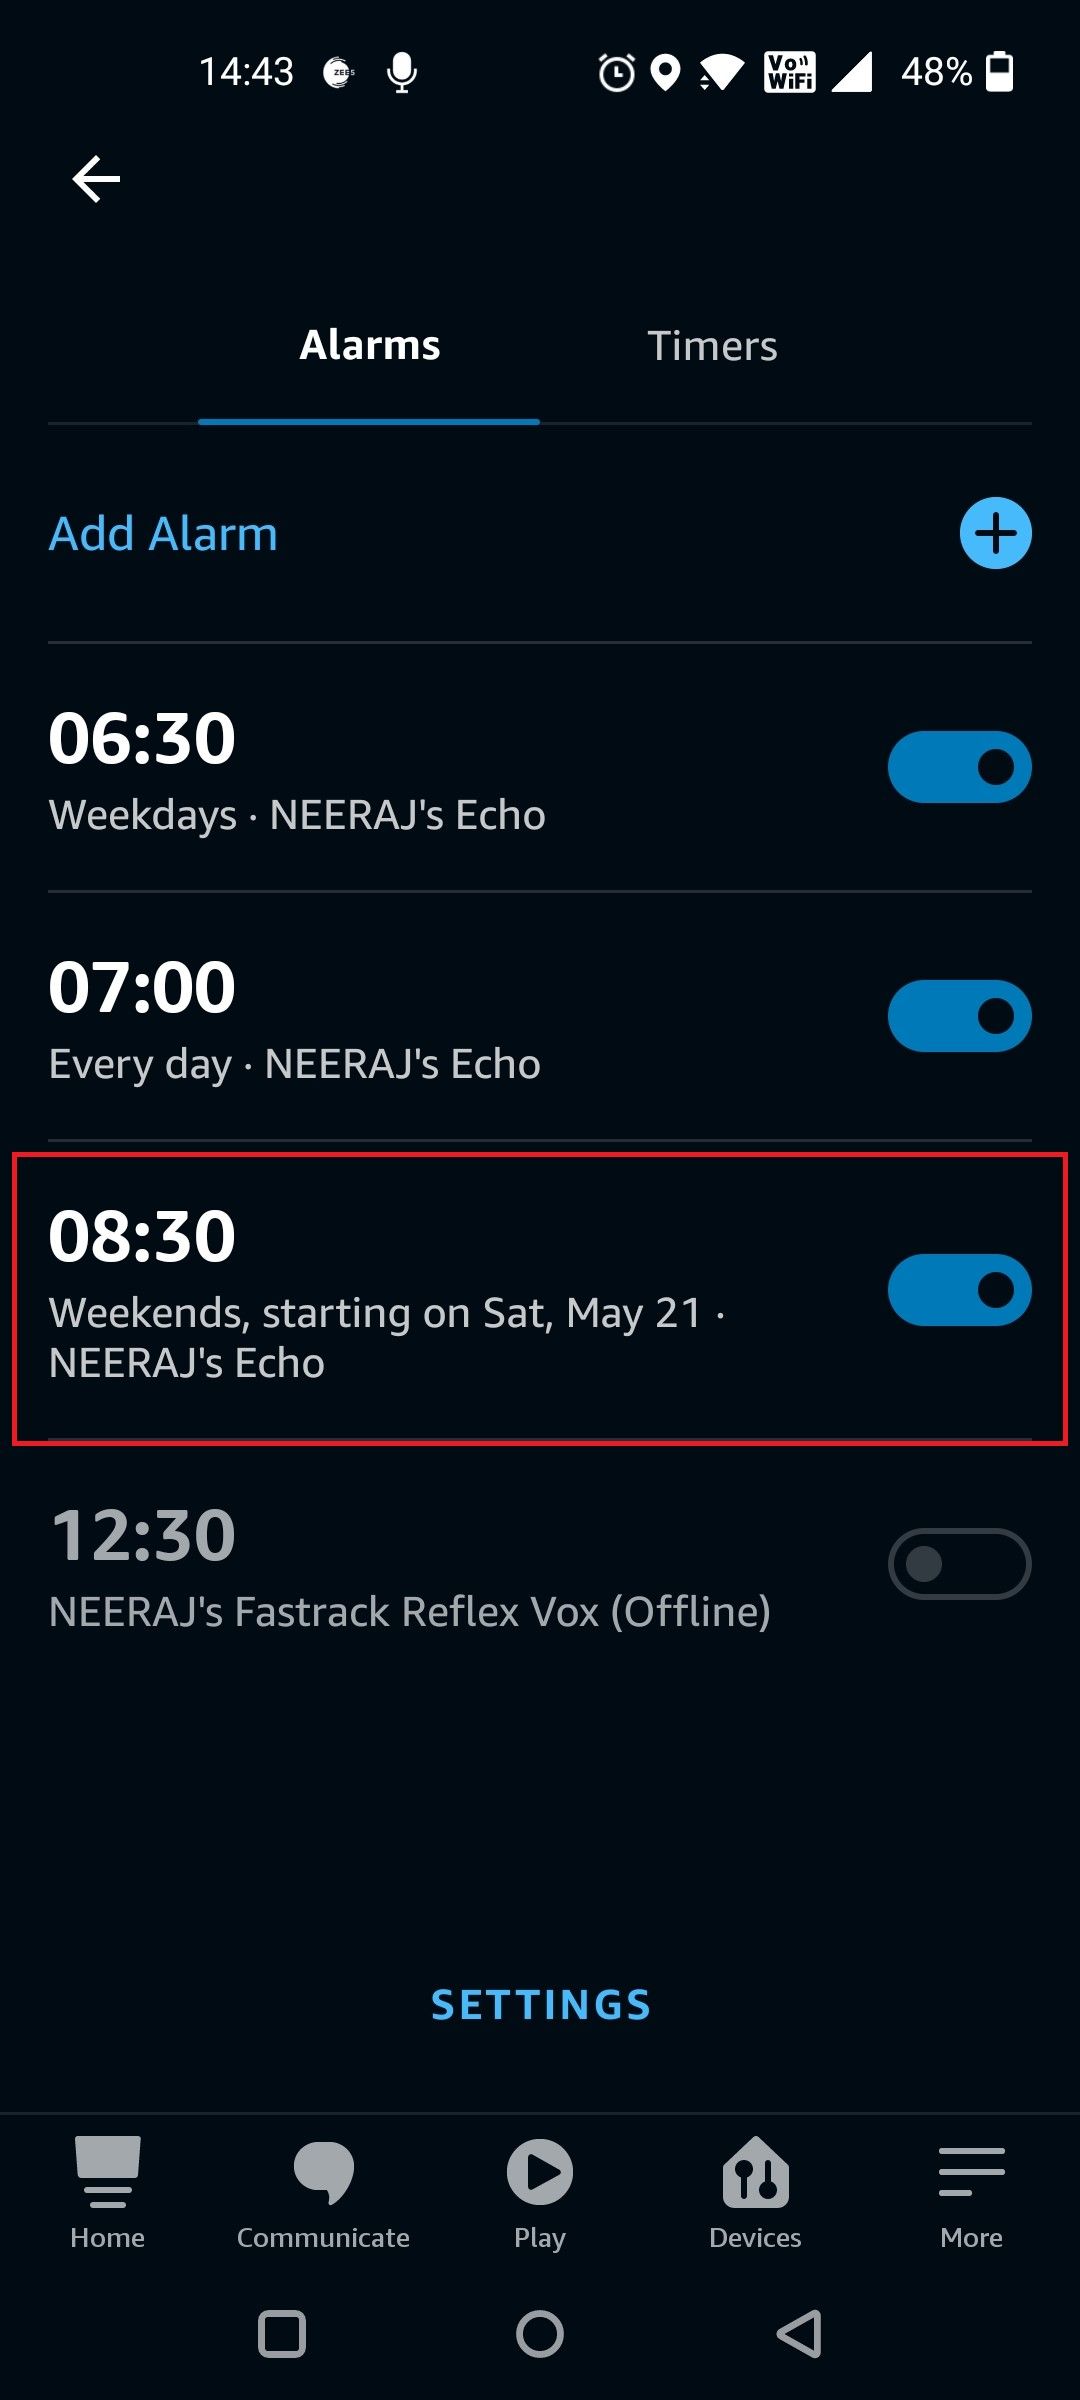 Set Repeating Alarm for Weekends on Amazon Echo